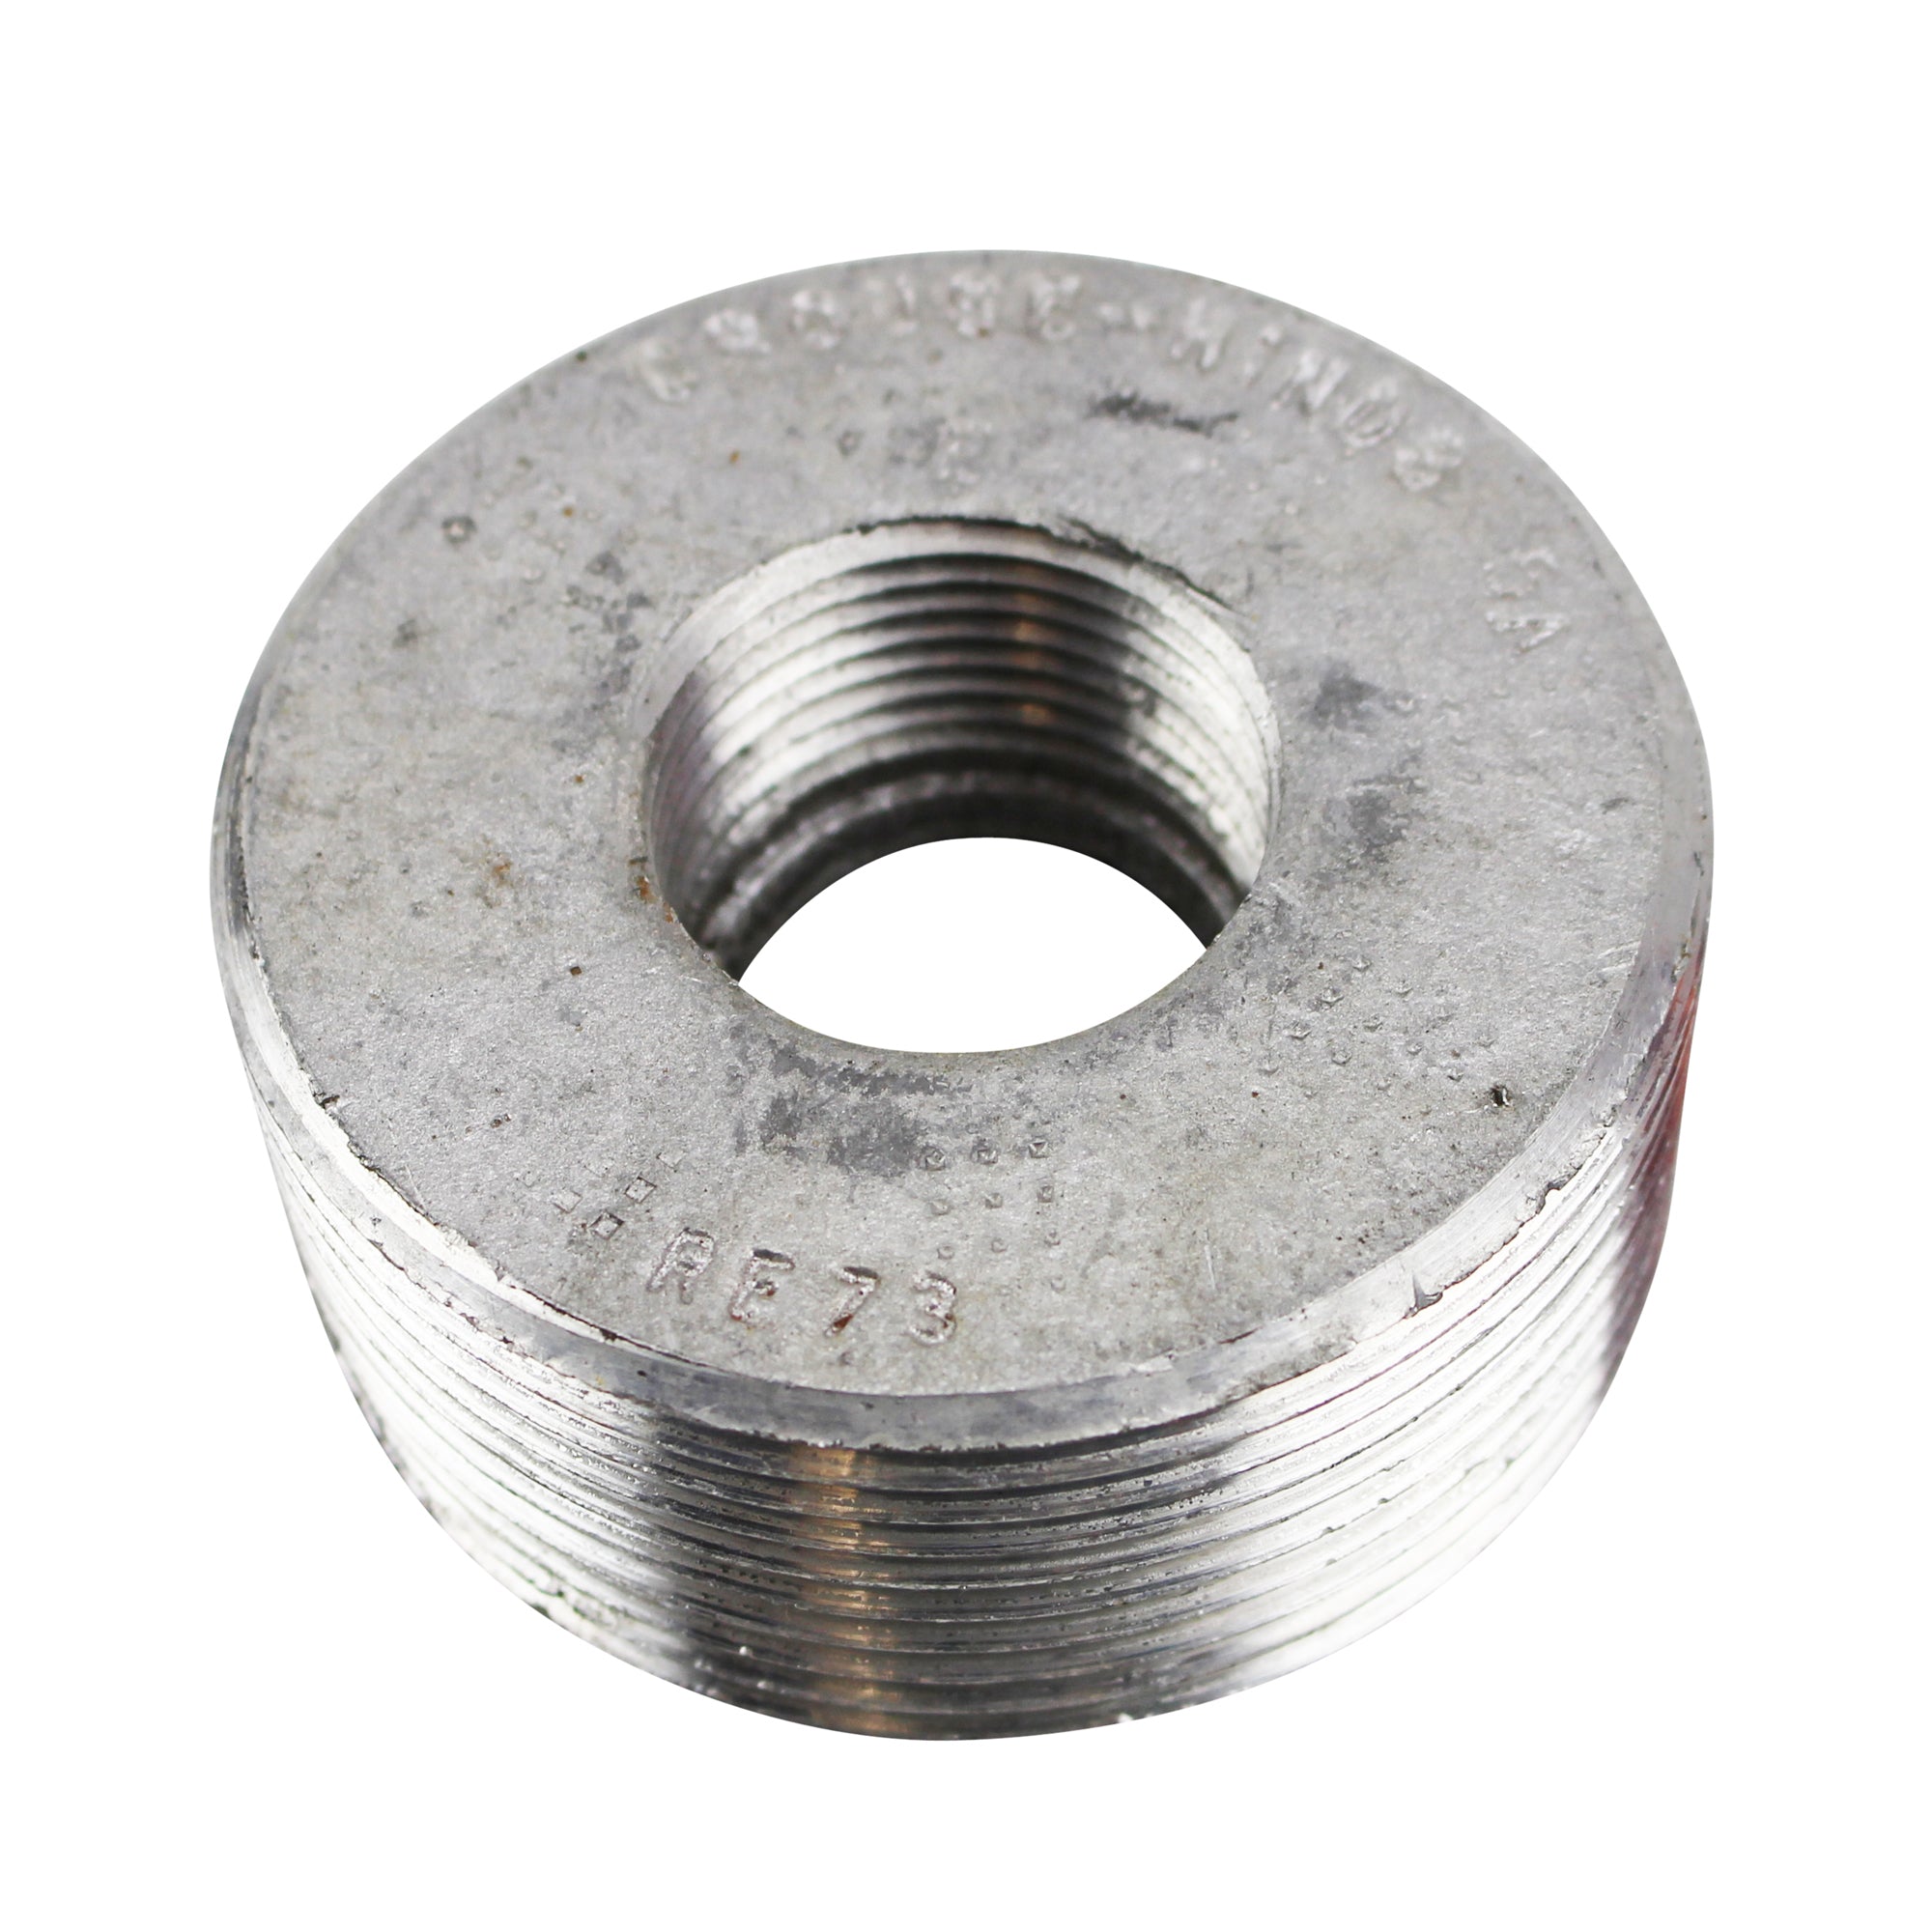 Crouse Hinds, COOPER CROUSE-HINDS RE73SA CONDUIT REDUCER BUSHING, 2-1/2" X 1"